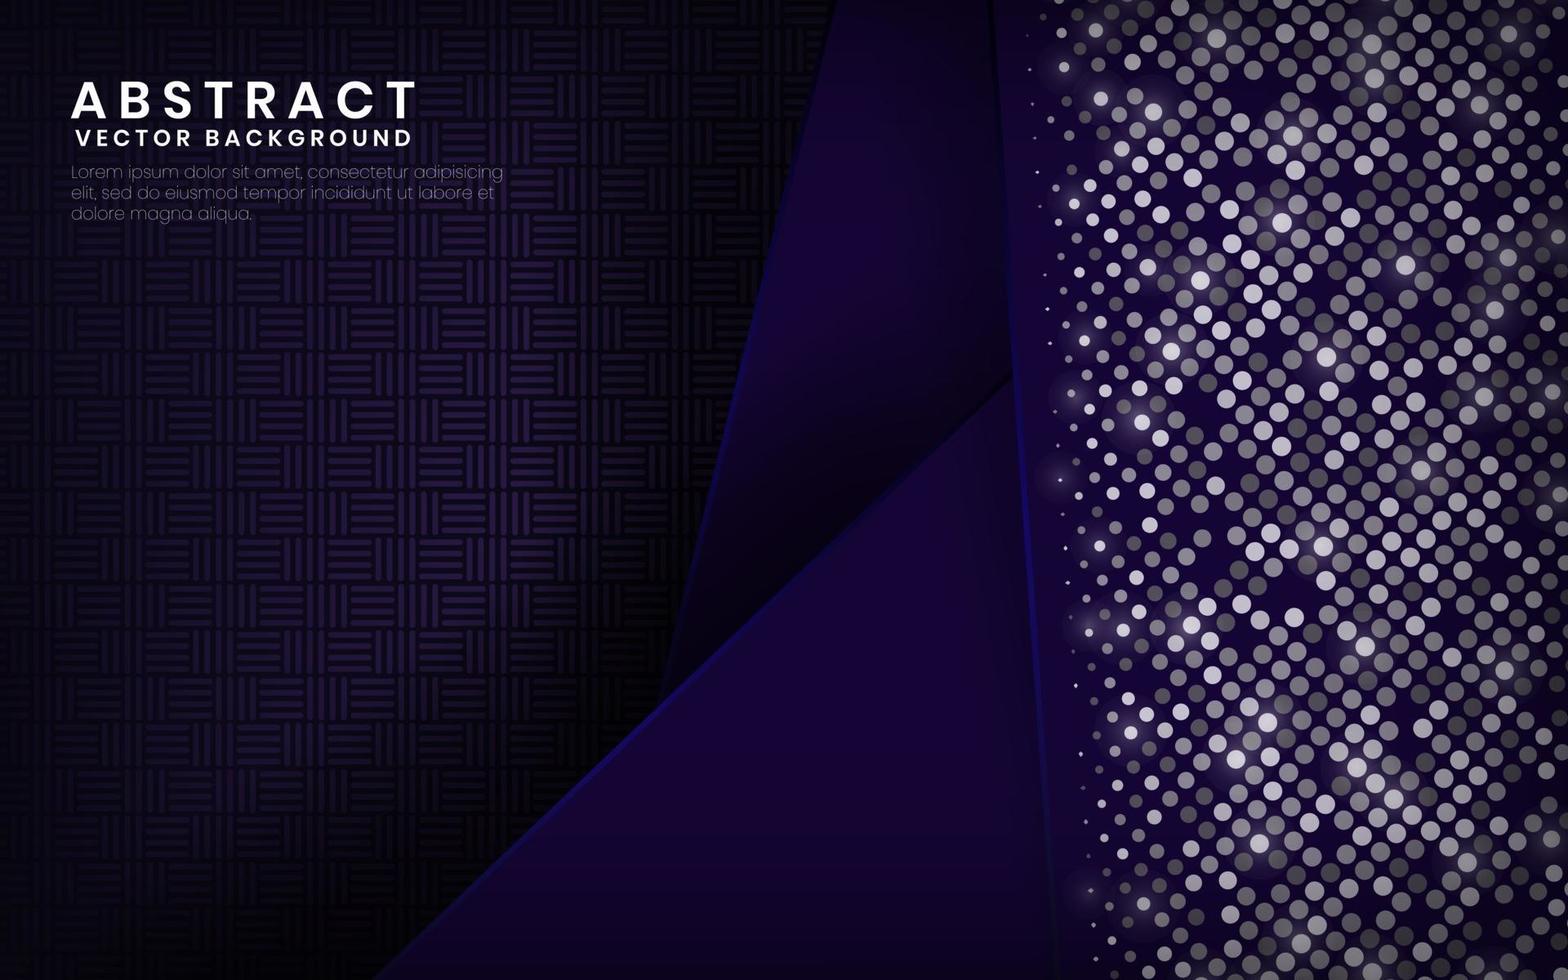 Modern navy and purple background vector overlap layer on dark space with abstract style for background design. Texture with silver glitters dots element decoration.